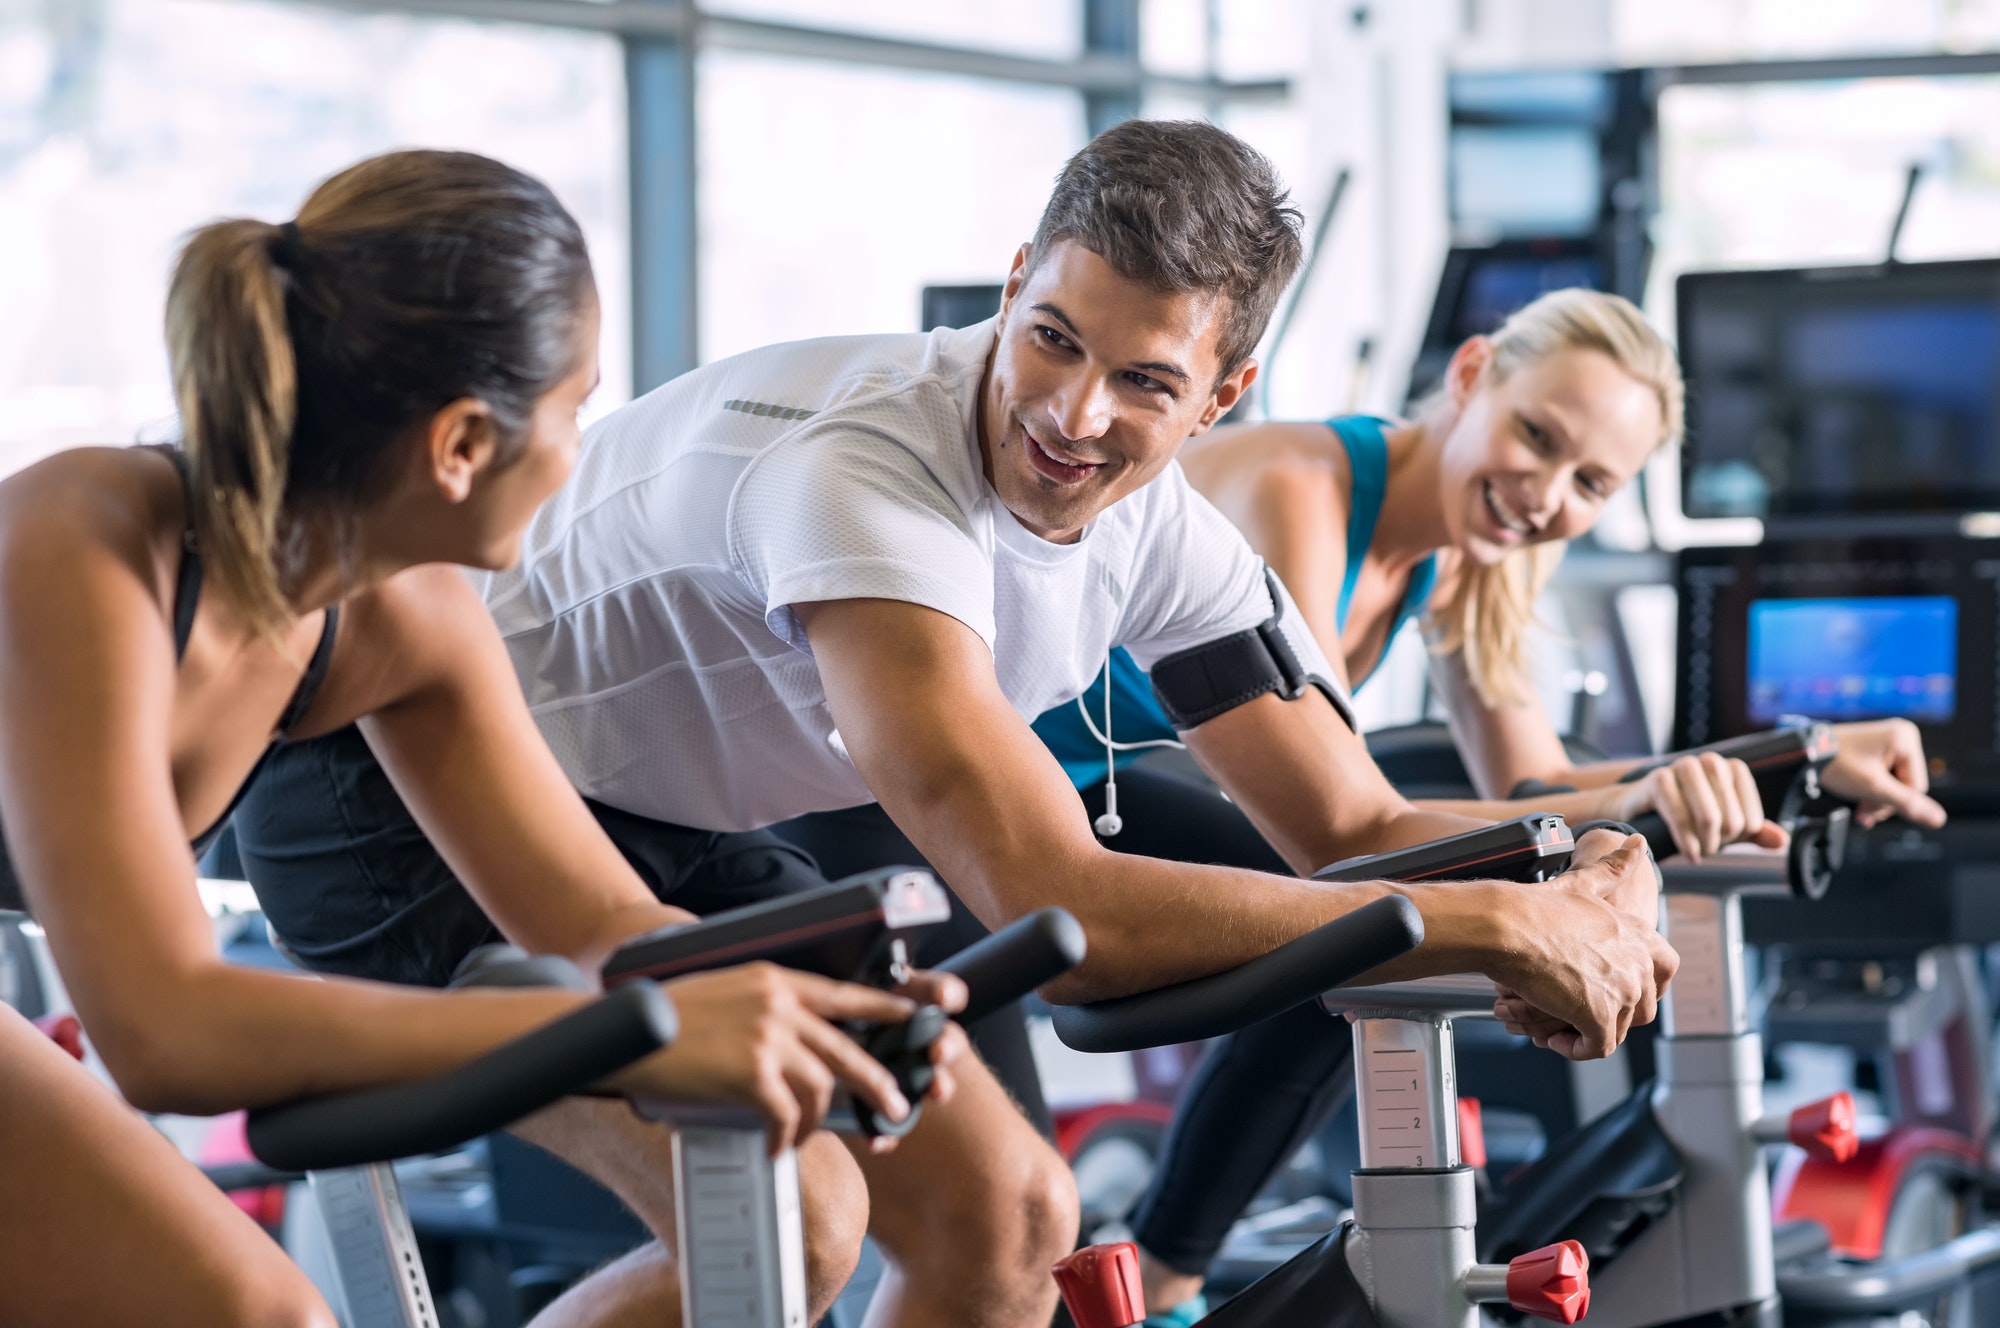 Fit people cycling at gym